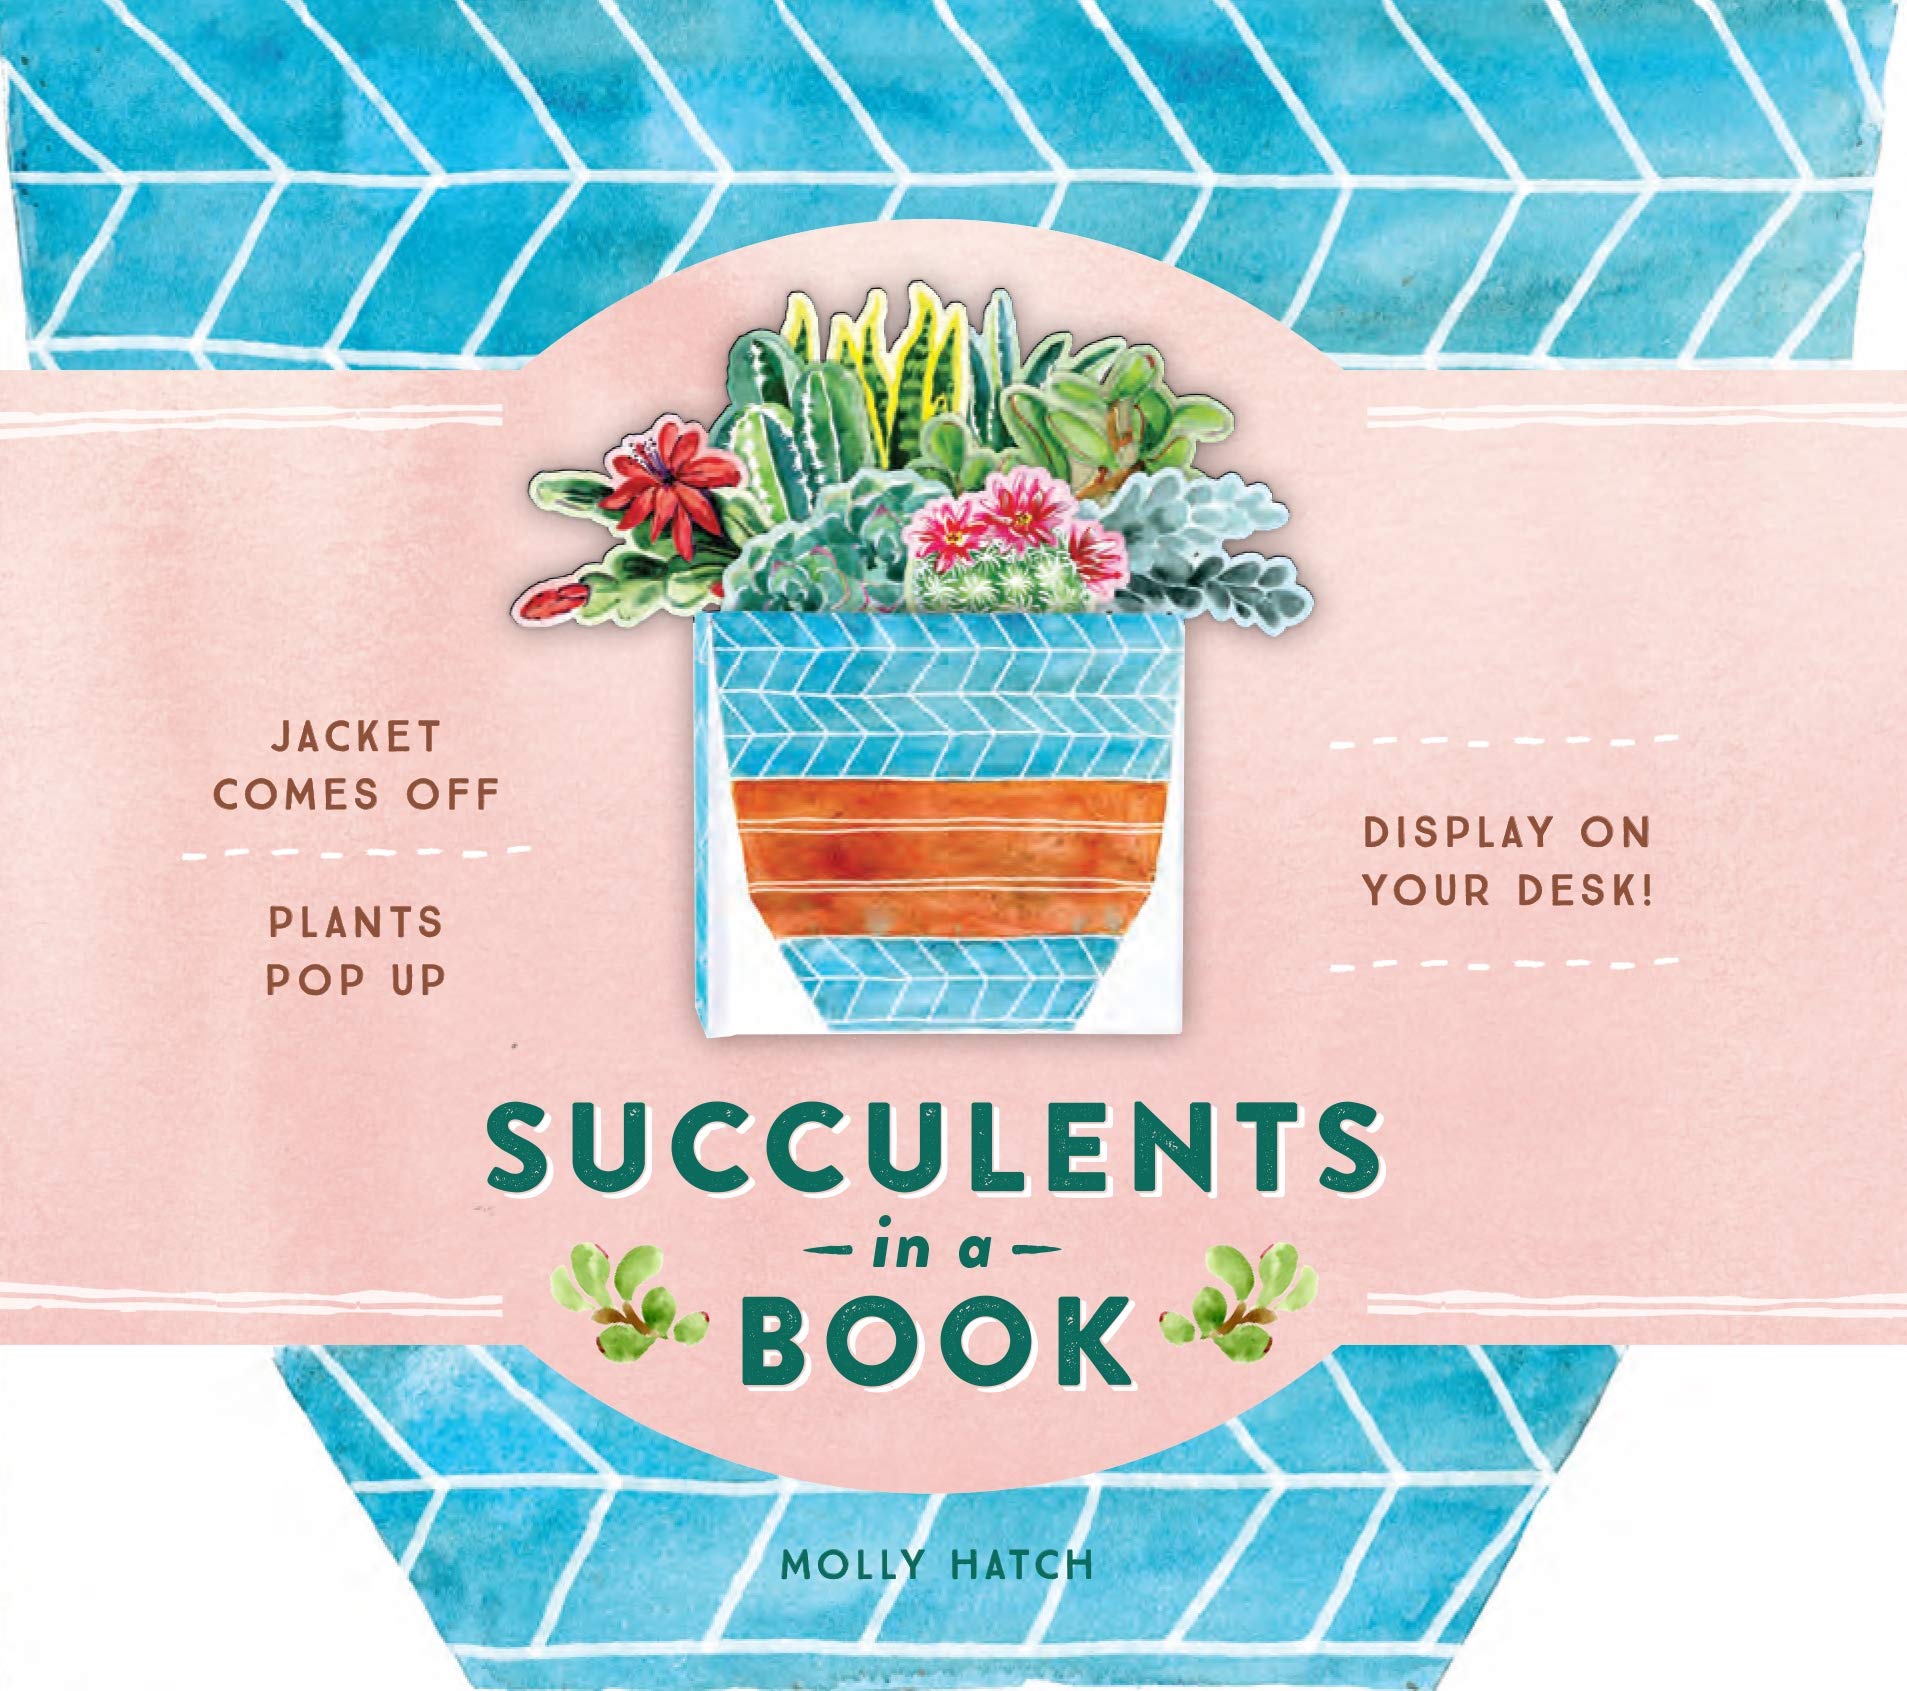 Succulents in a Book (UpLifting Editions): Jacket Comes Off. Plants Pop Up. Display on Your Desk! (H)